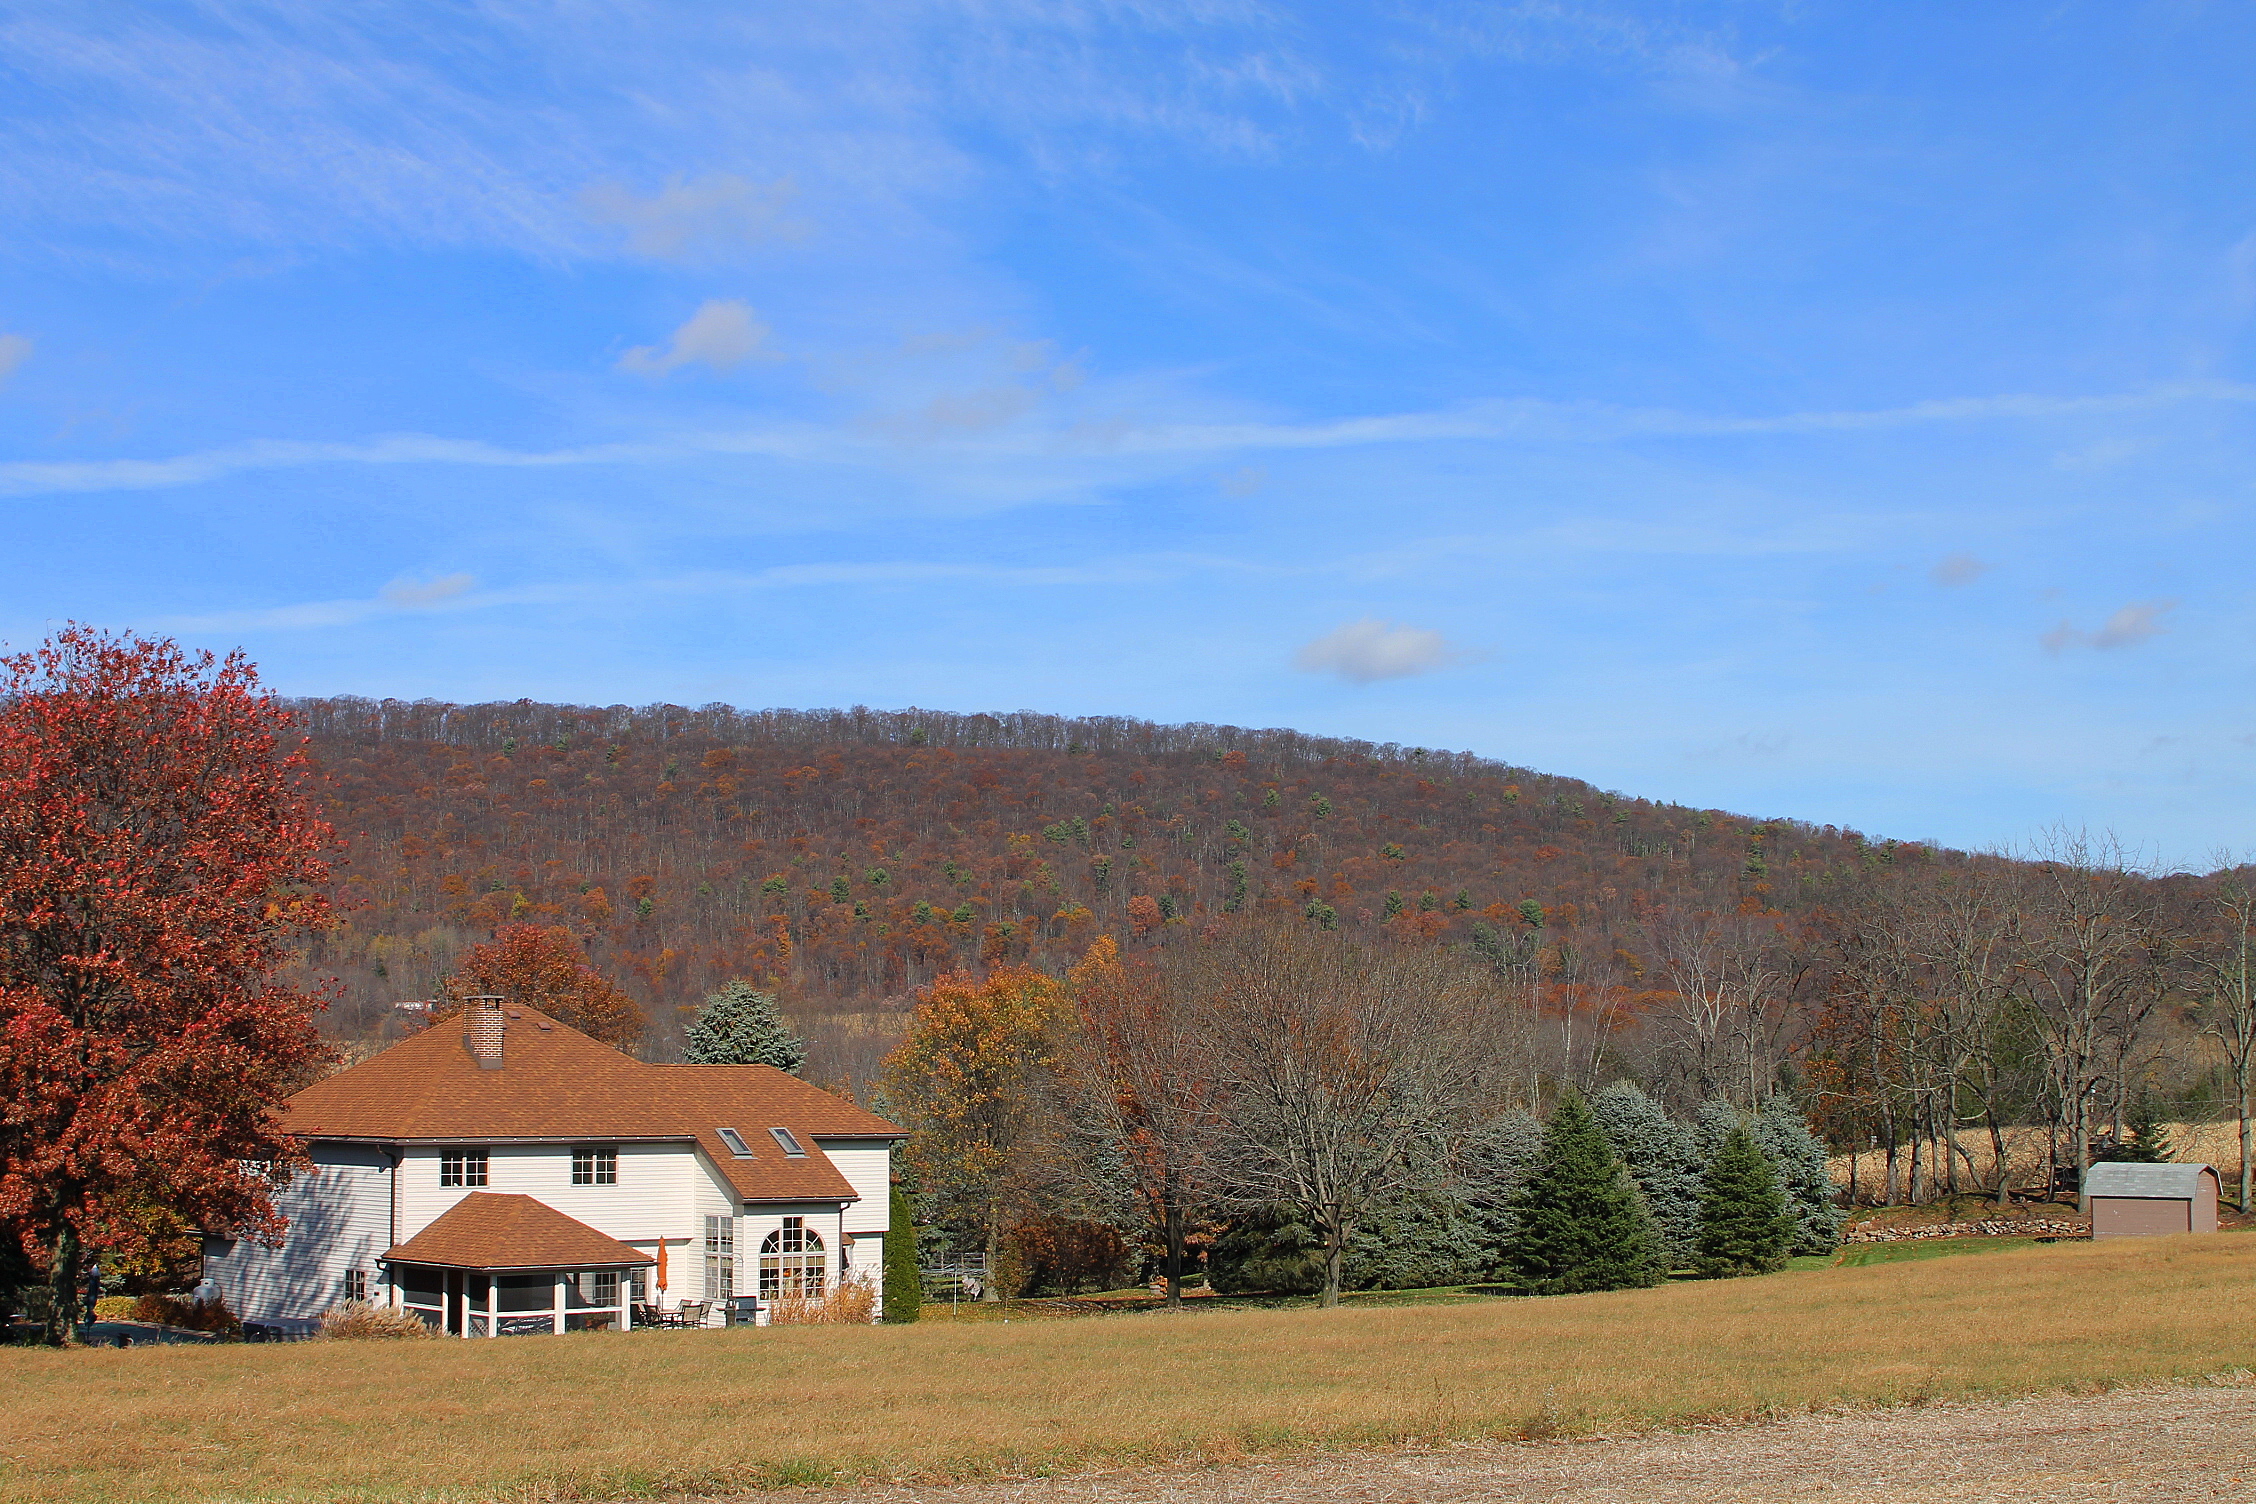 Catawissa Mountain from the west in November (2)